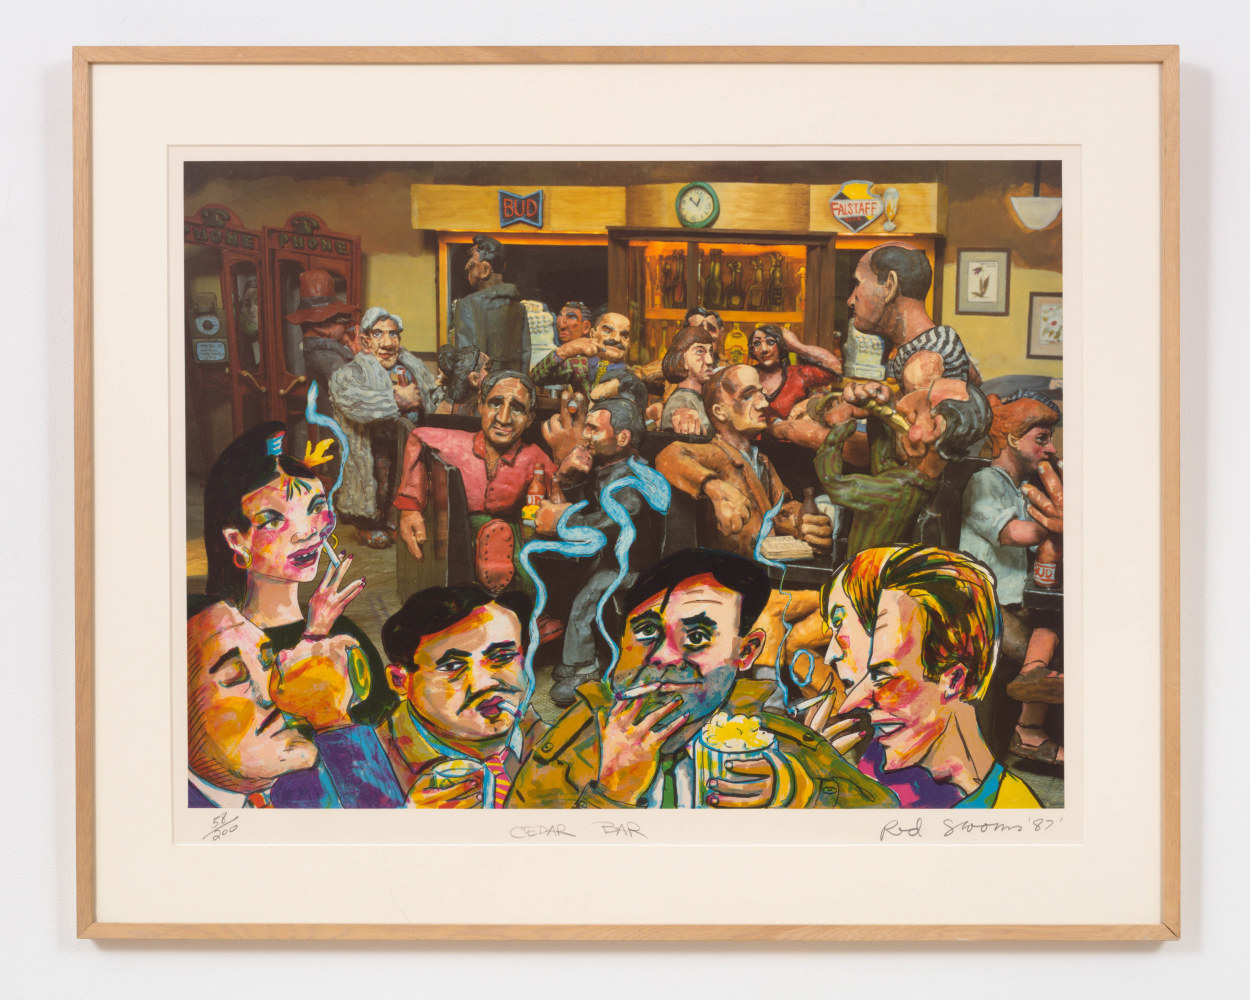 The Cedar Bar, 1987

offset lithograph in 4 colors on film and Mylar on Arches Cover paper, edition of 200

24 1/2 x 32 in. / 62.2 x 81.3 cm